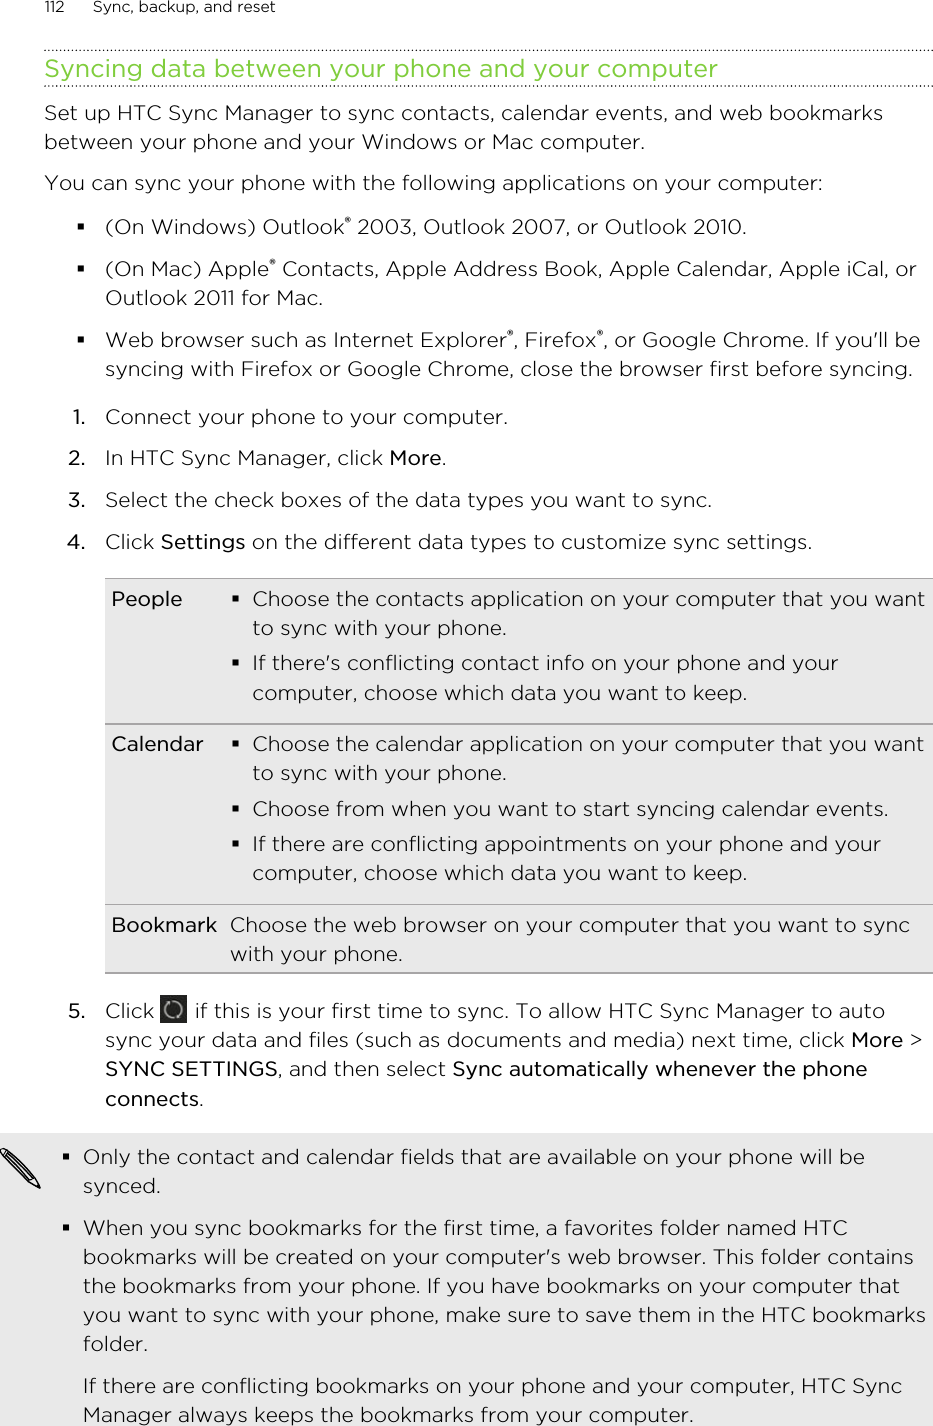 Syncing data between your phone and your computerSet up HTC Sync Manager to sync contacts, calendar events, and web bookmarksbetween your phone and your Windows or Mac computer.You can sync your phone with the following applications on your computer:§(On Windows) Outlook® 2003, Outlook 2007, or Outlook 2010.§(On Mac) Apple® Contacts, Apple Address Book, Apple Calendar, Apple iCal, orOutlook 2011 for Mac.§Web browser such as Internet Explorer®, Firefox®, or Google Chrome. If you&apos;ll besyncing with Firefox or Google Chrome, close the browser first before syncing.1. Connect your phone to your computer.2. In HTC Sync Manager, click More.3. Select the check boxes of the data types you want to sync.4. Click Settings on the different data types to customize sync settings.People §Choose the contacts application on your computer that you wantto sync with your phone.§If there&apos;s conflicting contact info on your phone and yourcomputer, choose which data you want to keep.Calendar §Choose the calendar application on your computer that you wantto sync with your phone.§Choose from when you want to start syncing calendar events.§If there are conflicting appointments on your phone and yourcomputer, choose which data you want to keep.Bookmark Choose the web browser on your computer that you want to syncwith your phone.5. Click   if this is your first time to sync. To allow HTC Sync Manager to autosync your data and files (such as documents and media) next time, click More &gt;SYNC SETTINGS, and then select Sync automatically whenever the phoneconnects.§Only the contact and calendar fields that are available on your phone will besynced.§When you sync bookmarks for the first time, a favorites folder named HTCbookmarks will be created on your computer&apos;s web browser. This folder containsthe bookmarks from your phone. If you have bookmarks on your computer thatyou want to sync with your phone, make sure to save them in the HTC bookmarksfolder.If there are conflicting bookmarks on your phone and your computer, HTC SyncManager always keeps the bookmarks from your computer.112 Sync, backup, and resetHTC Confidential for Certification HTC Confidential for Certification 